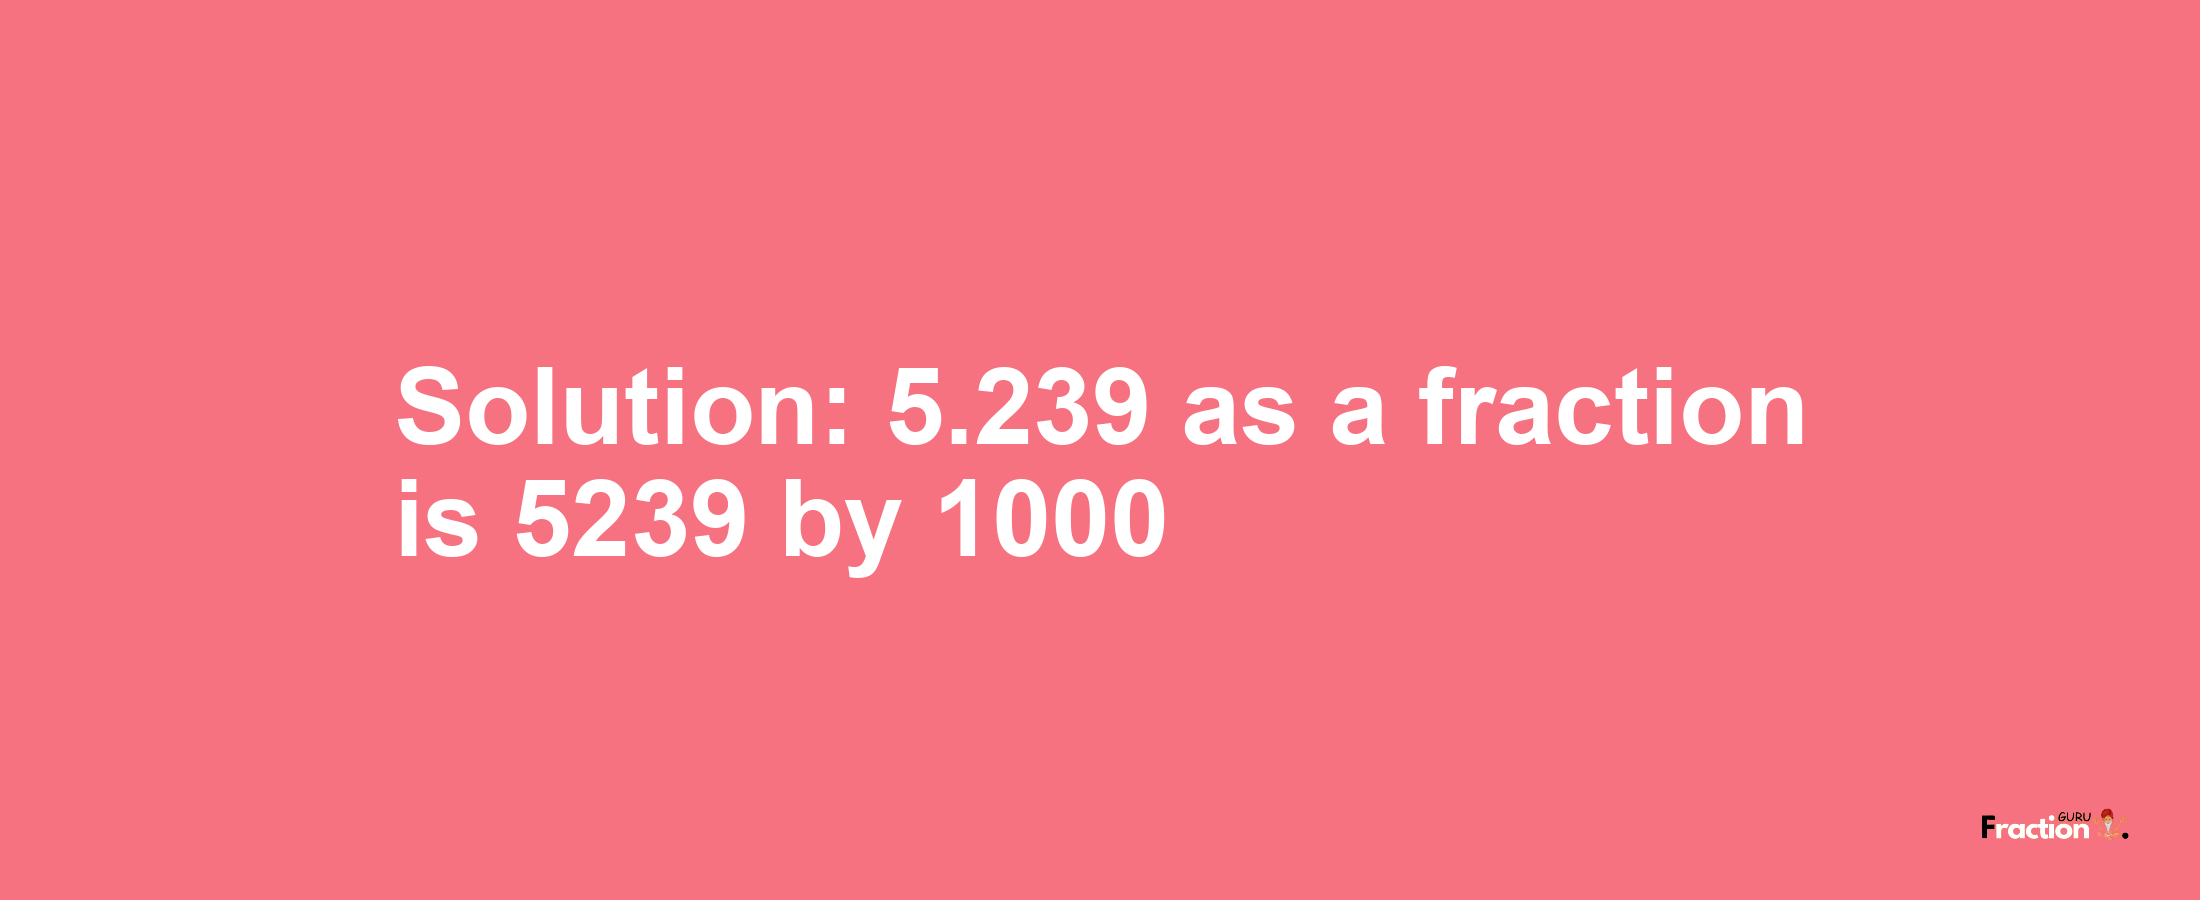 Solution:5.239 as a fraction is 5239/1000